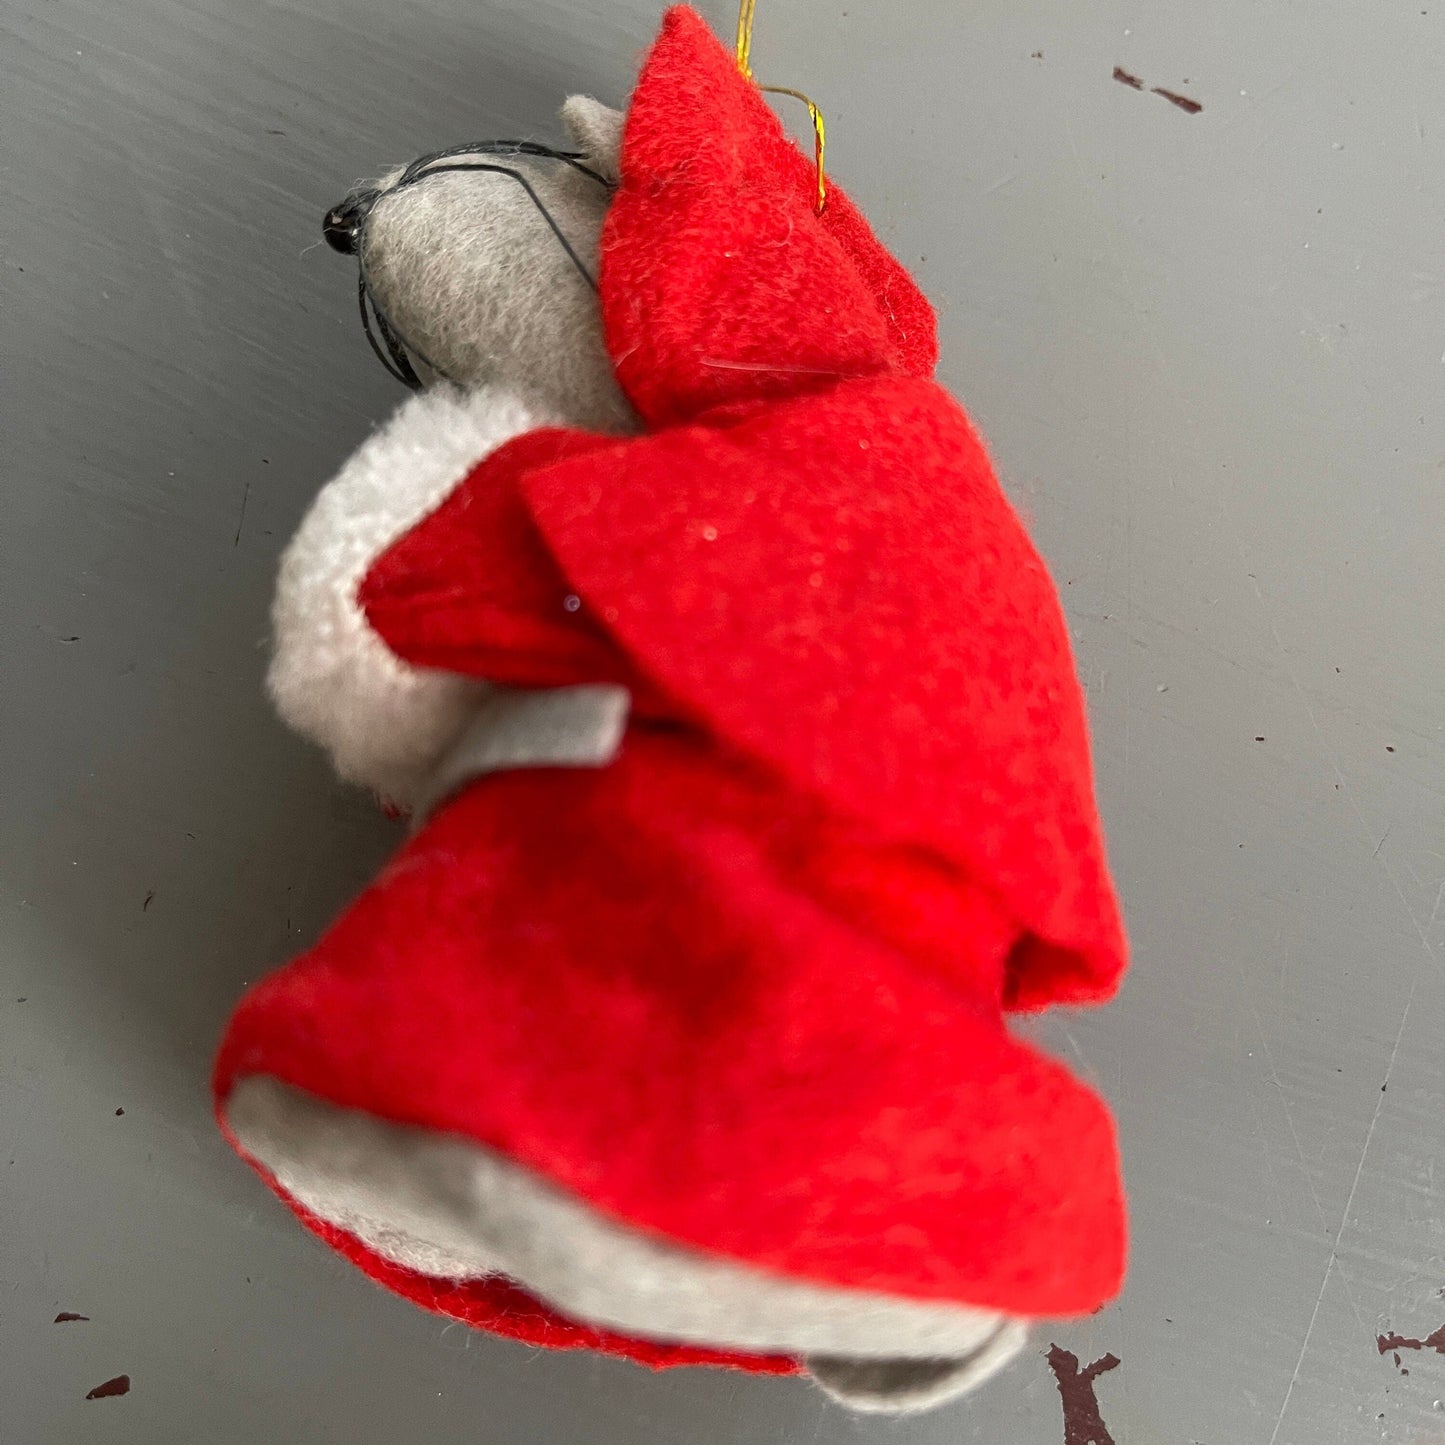 Pretty Little Lady Mouse In Red Bonnet and Coat with White Hand Warmer Vintage Felt Christmas Ornament